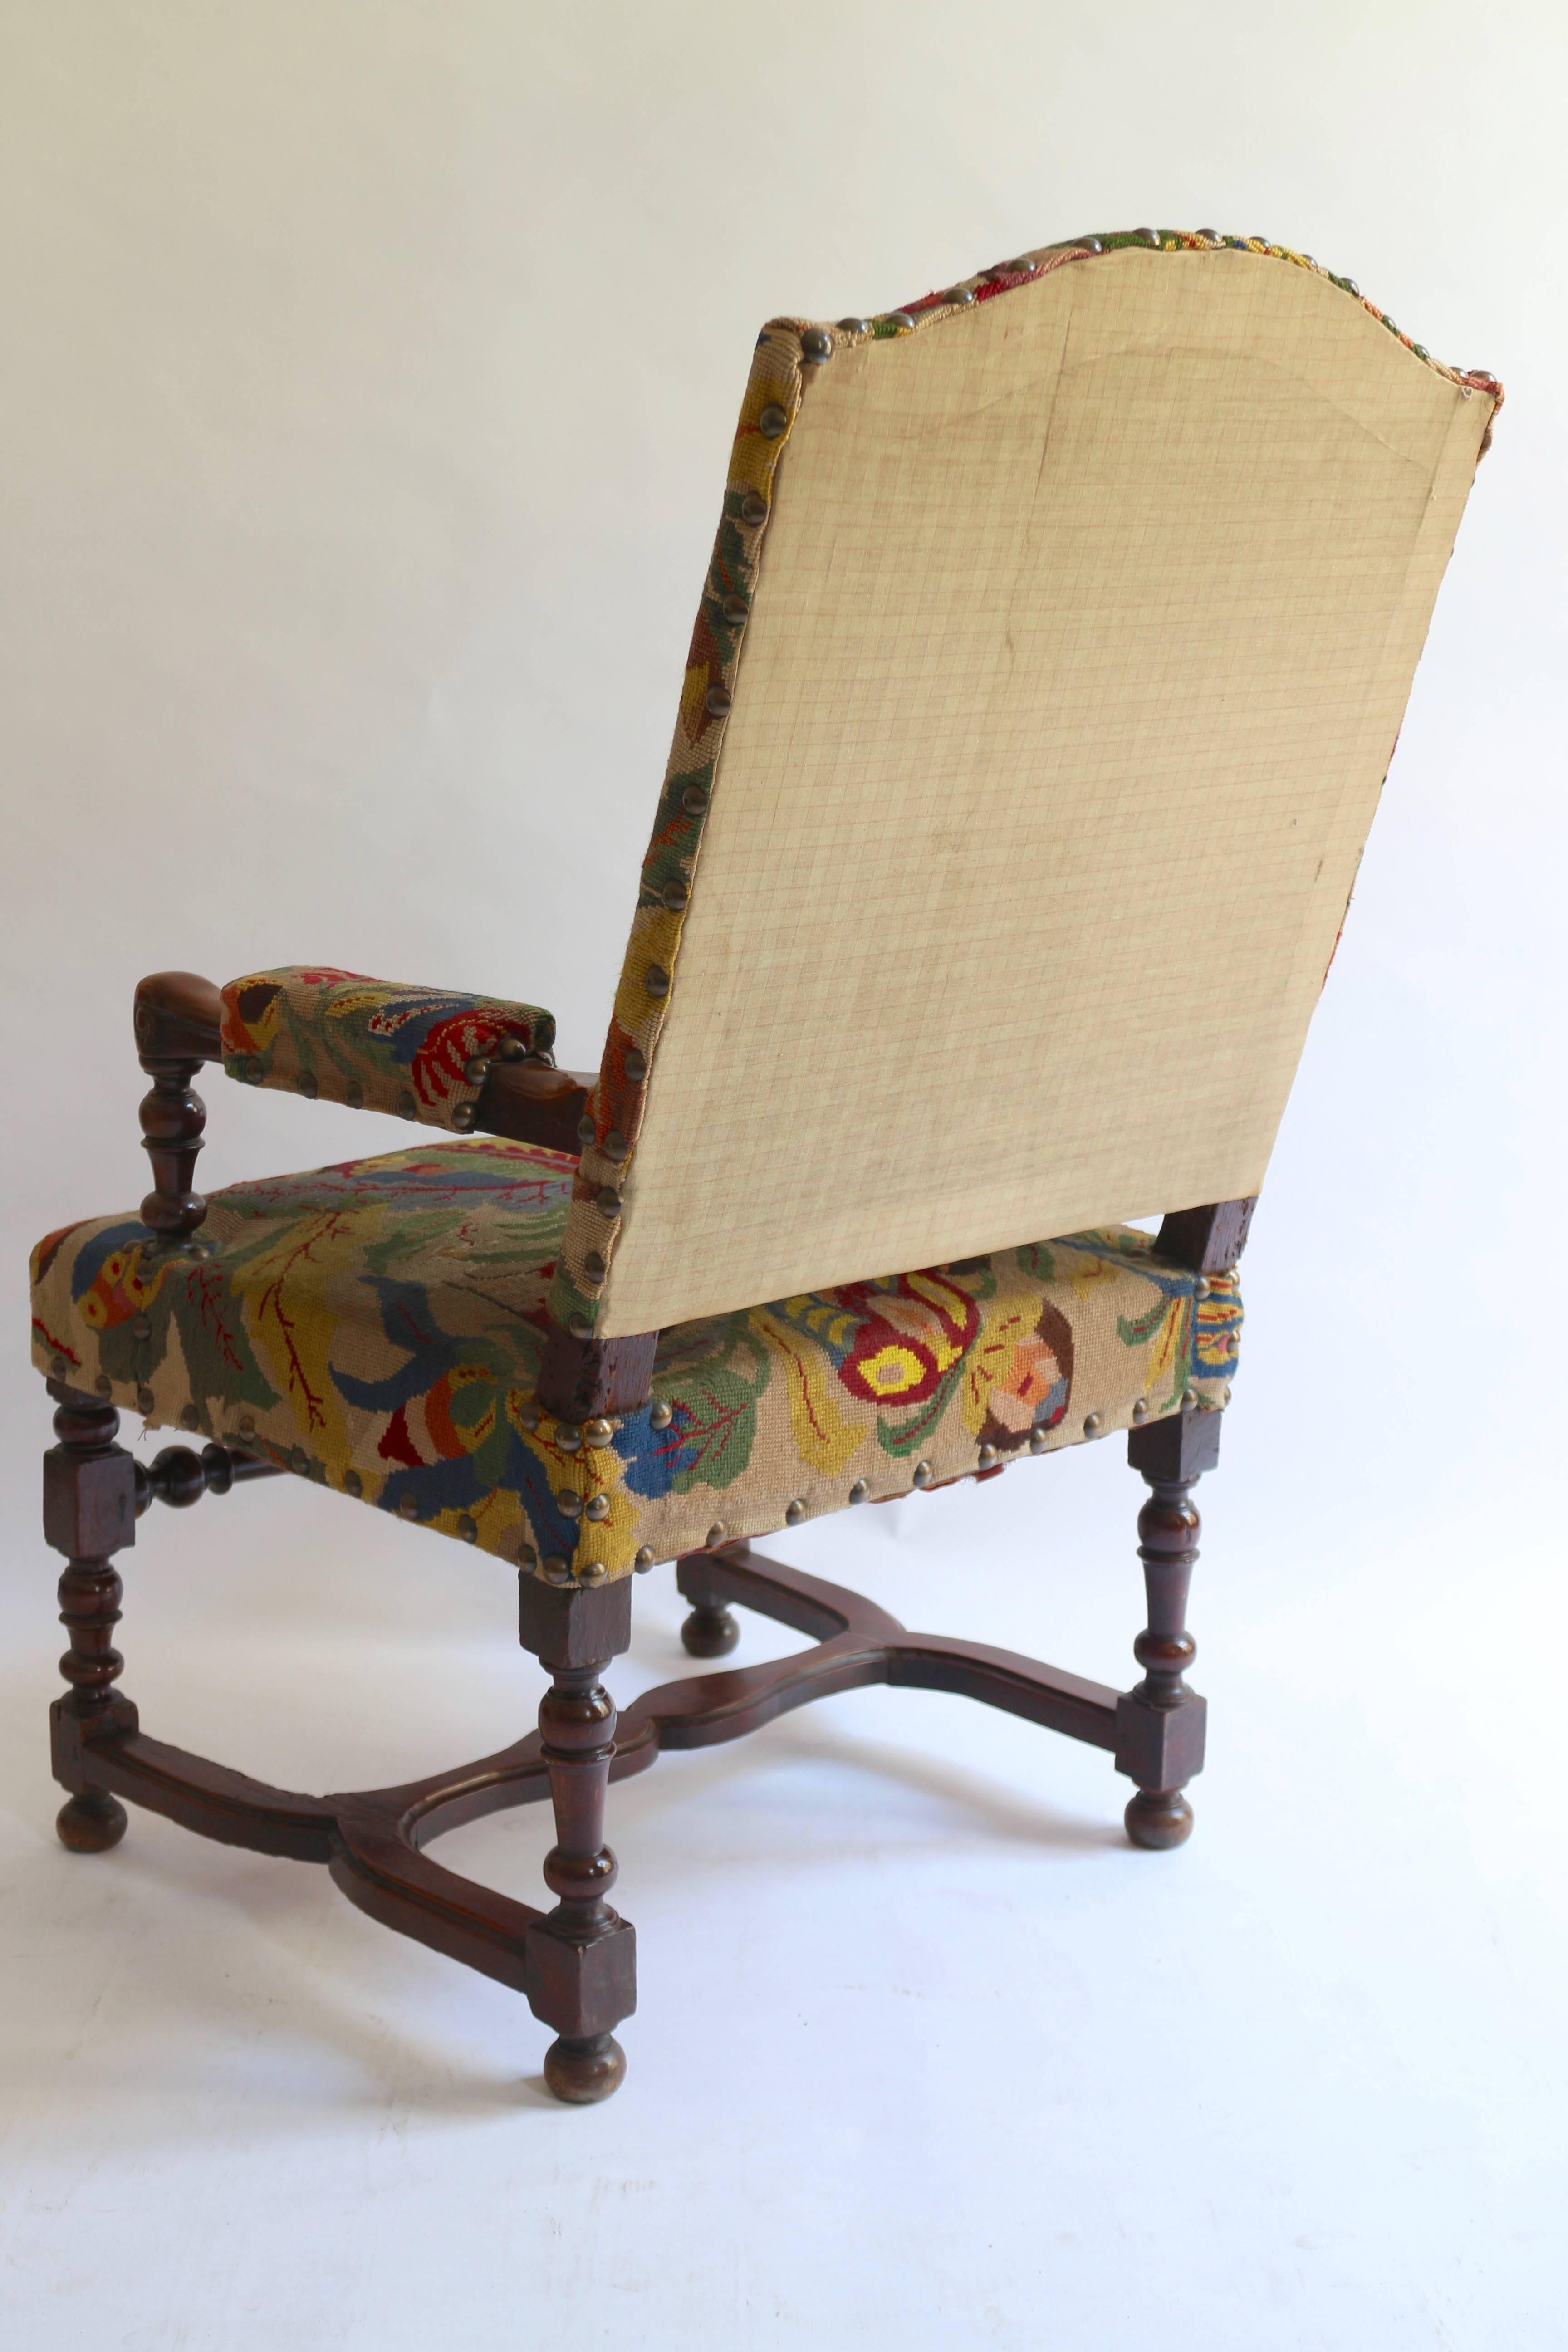 Very elegant armchair in walnut and upholstered with old colorful tapestry.
Very comfortable and stable seating.
Some old restorations but well done.